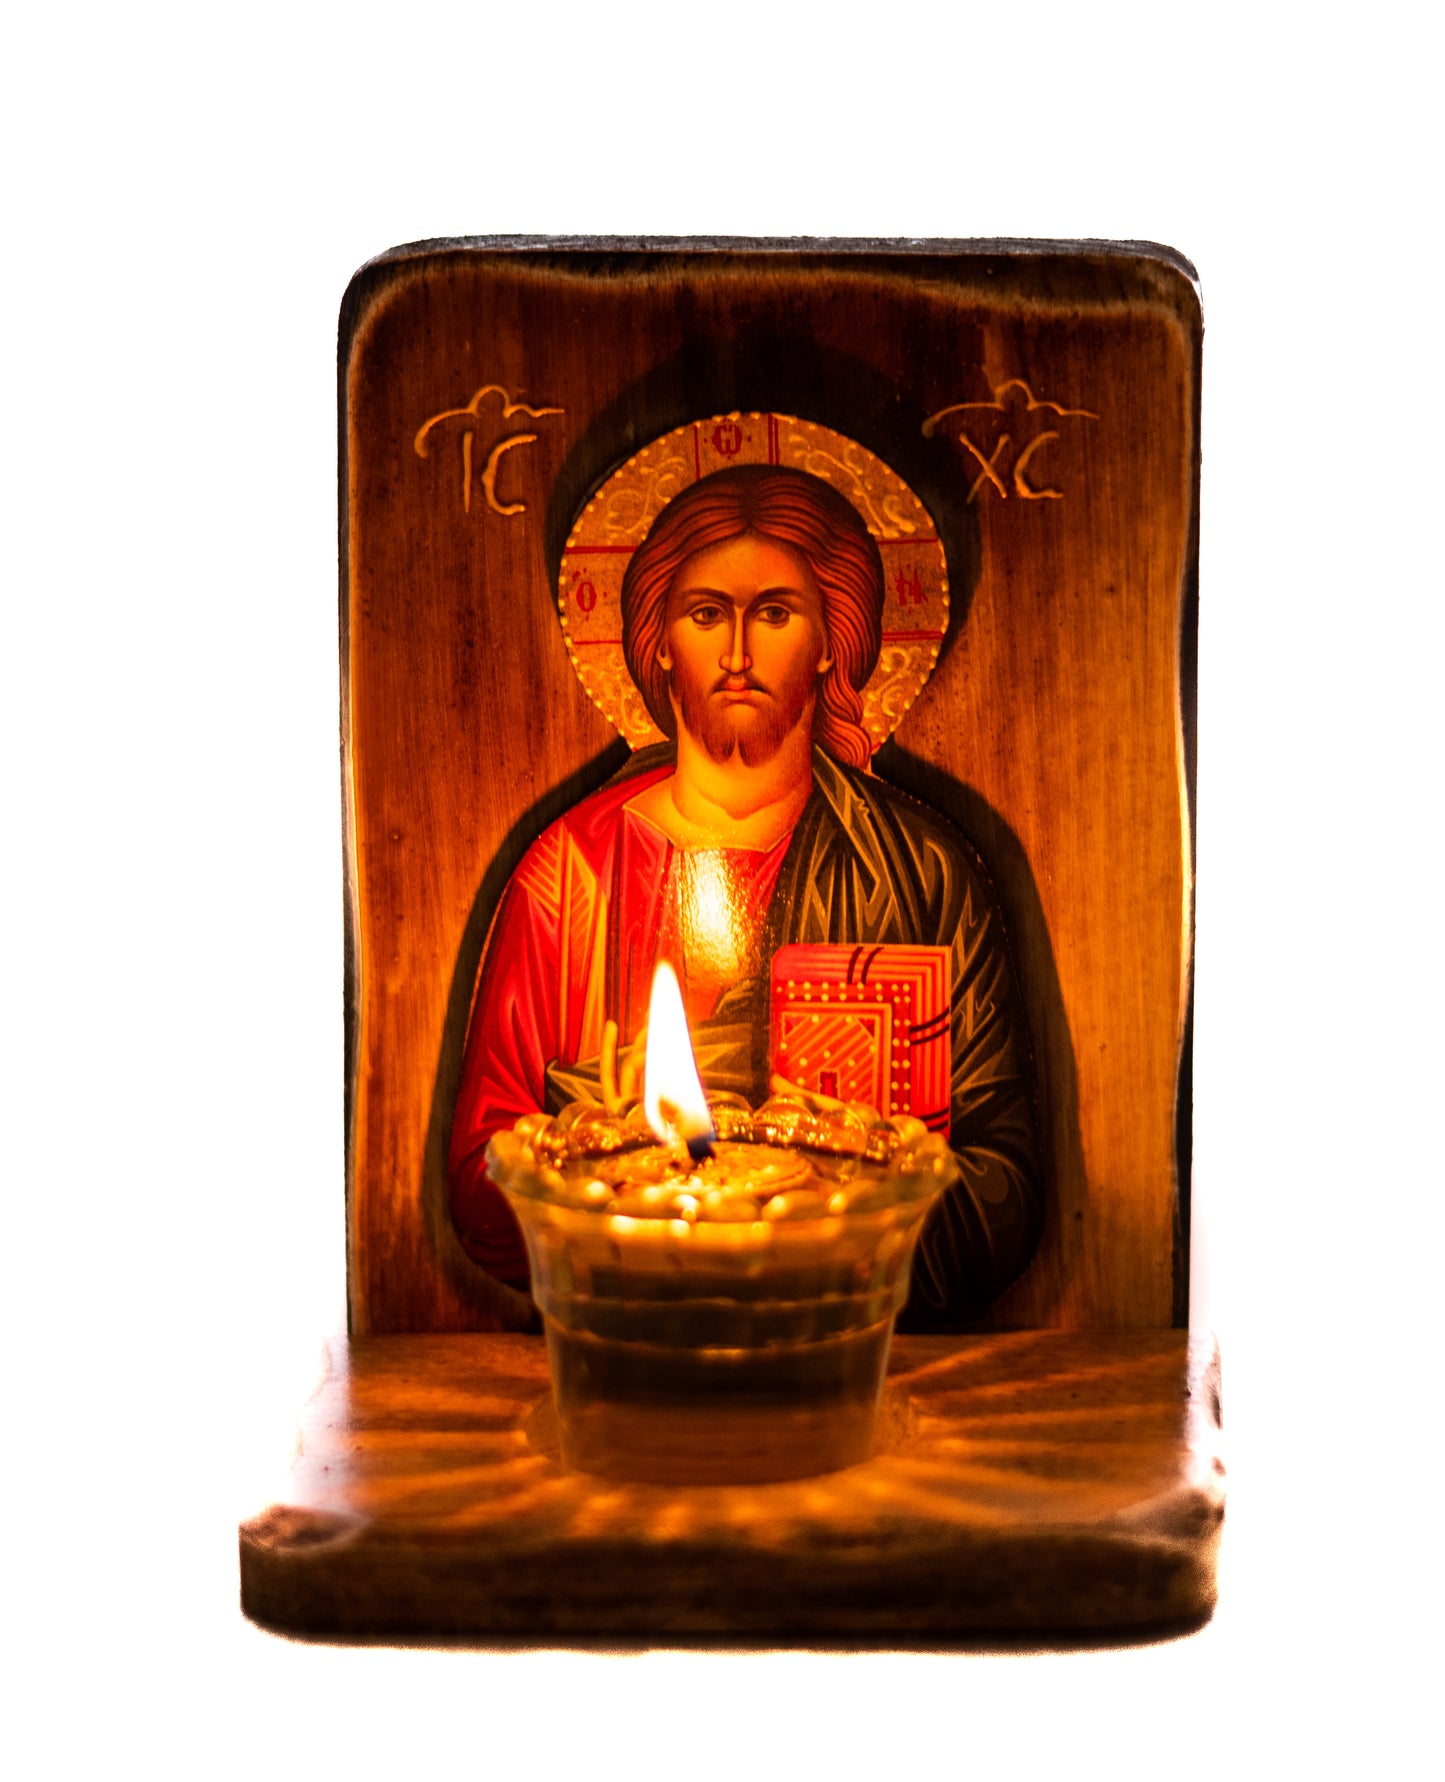 Christian Iconostasis with Jesus Christ, Handmade Mount Athos Orthodox shrine with Our Lord,Byzantine altar wall hanging wood plaque TheHolyArt